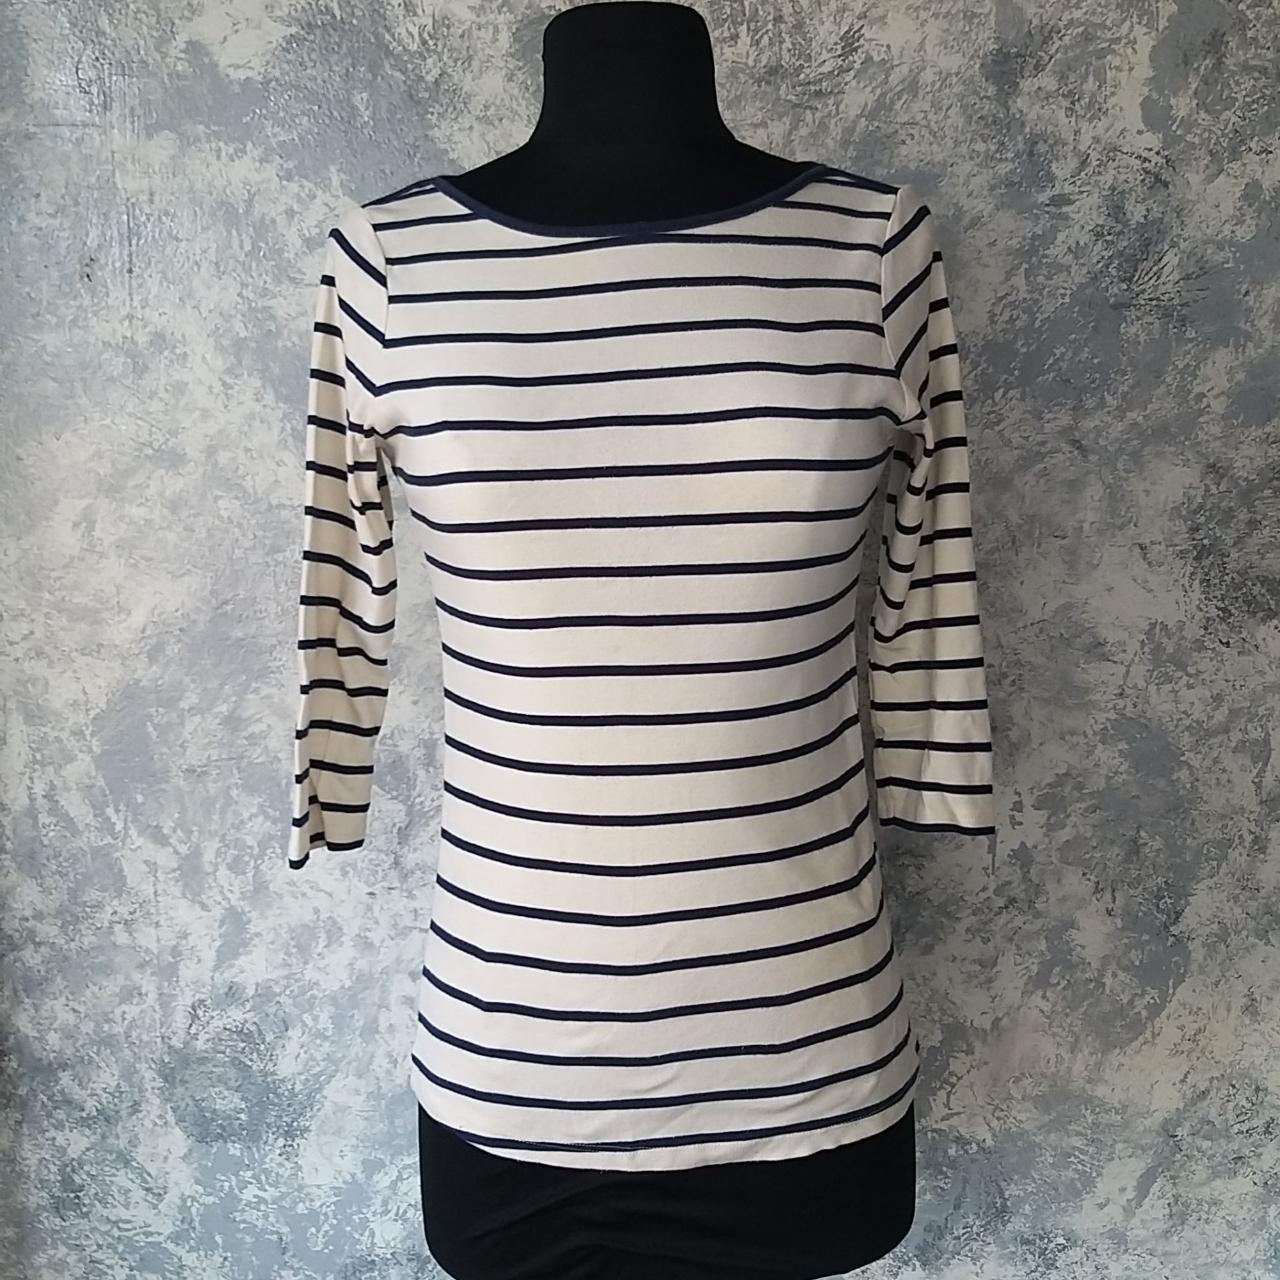 Zara Navy Blue And Off-White Striped Blouse 3/4... - Depop